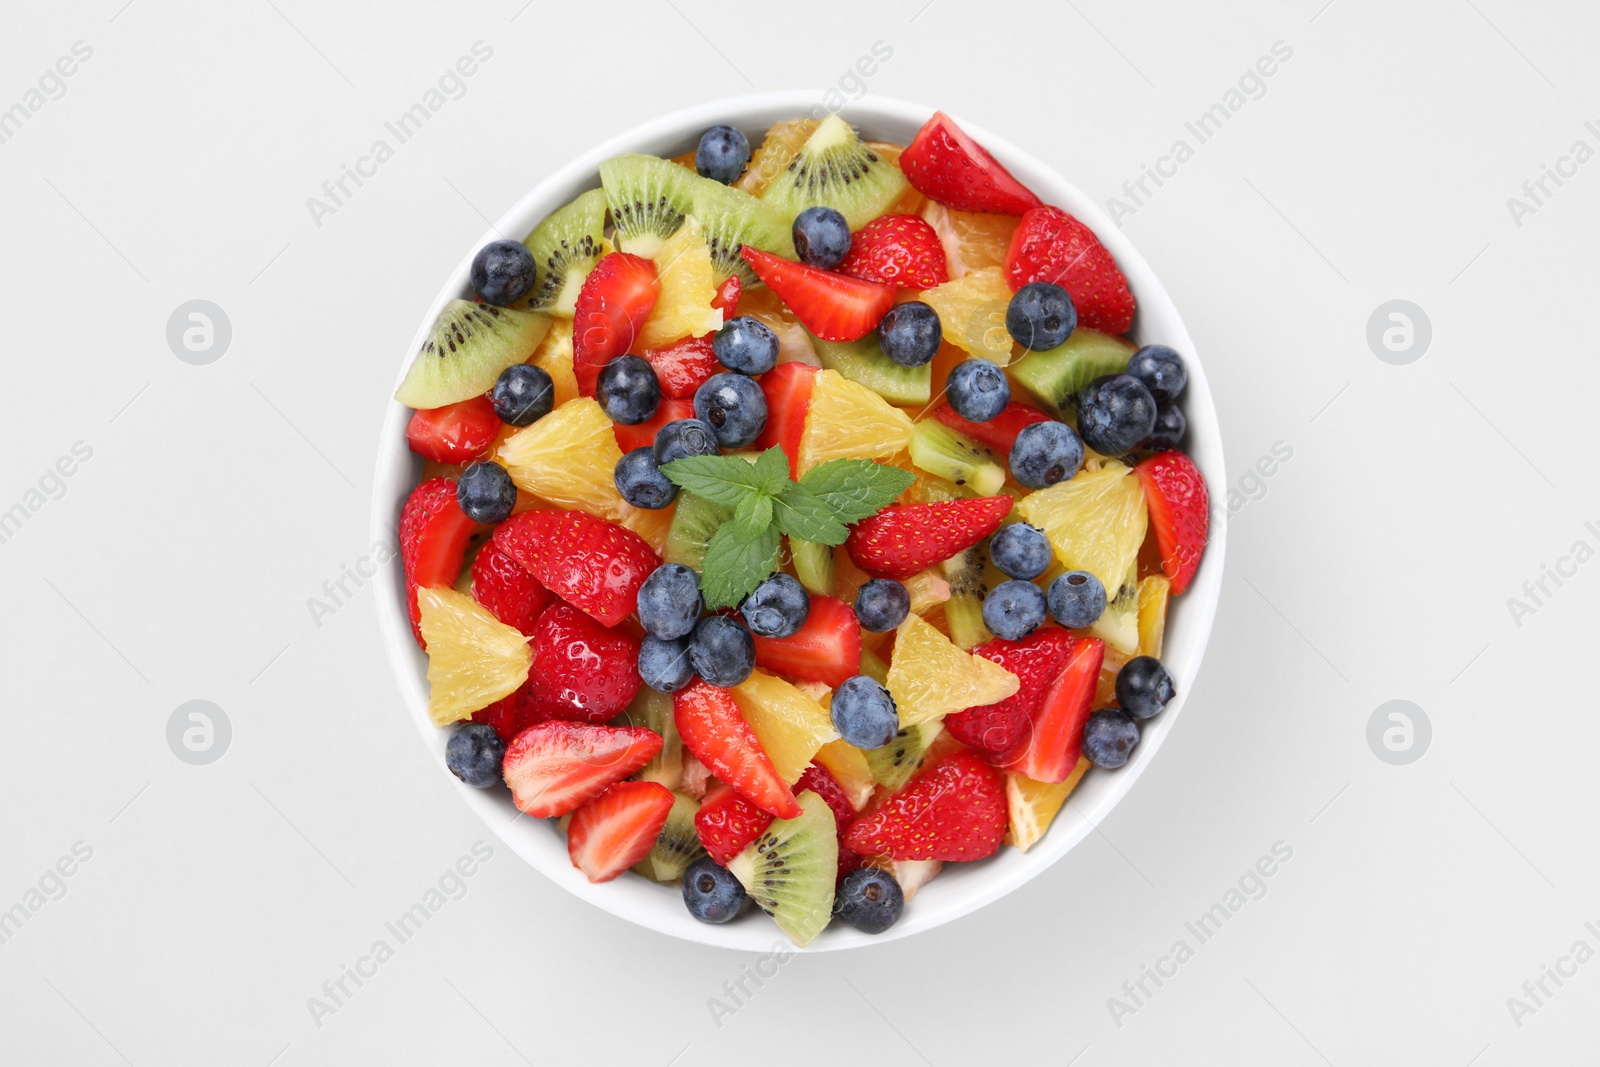 Photo of Yummy fruit salad in bowl on light background, top view